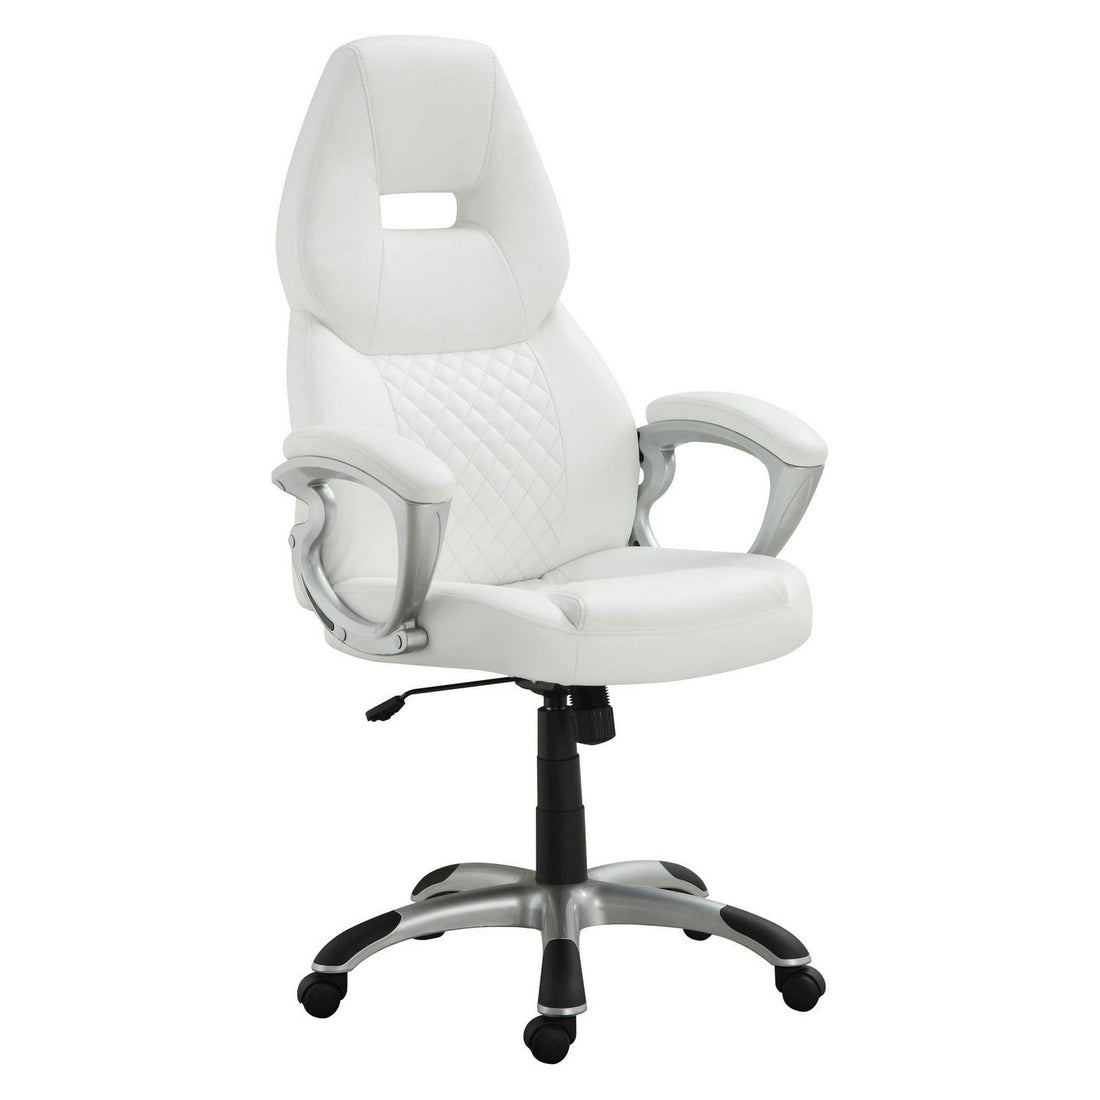 Bruce Adjustable Height Office Chair White and Silver 800150